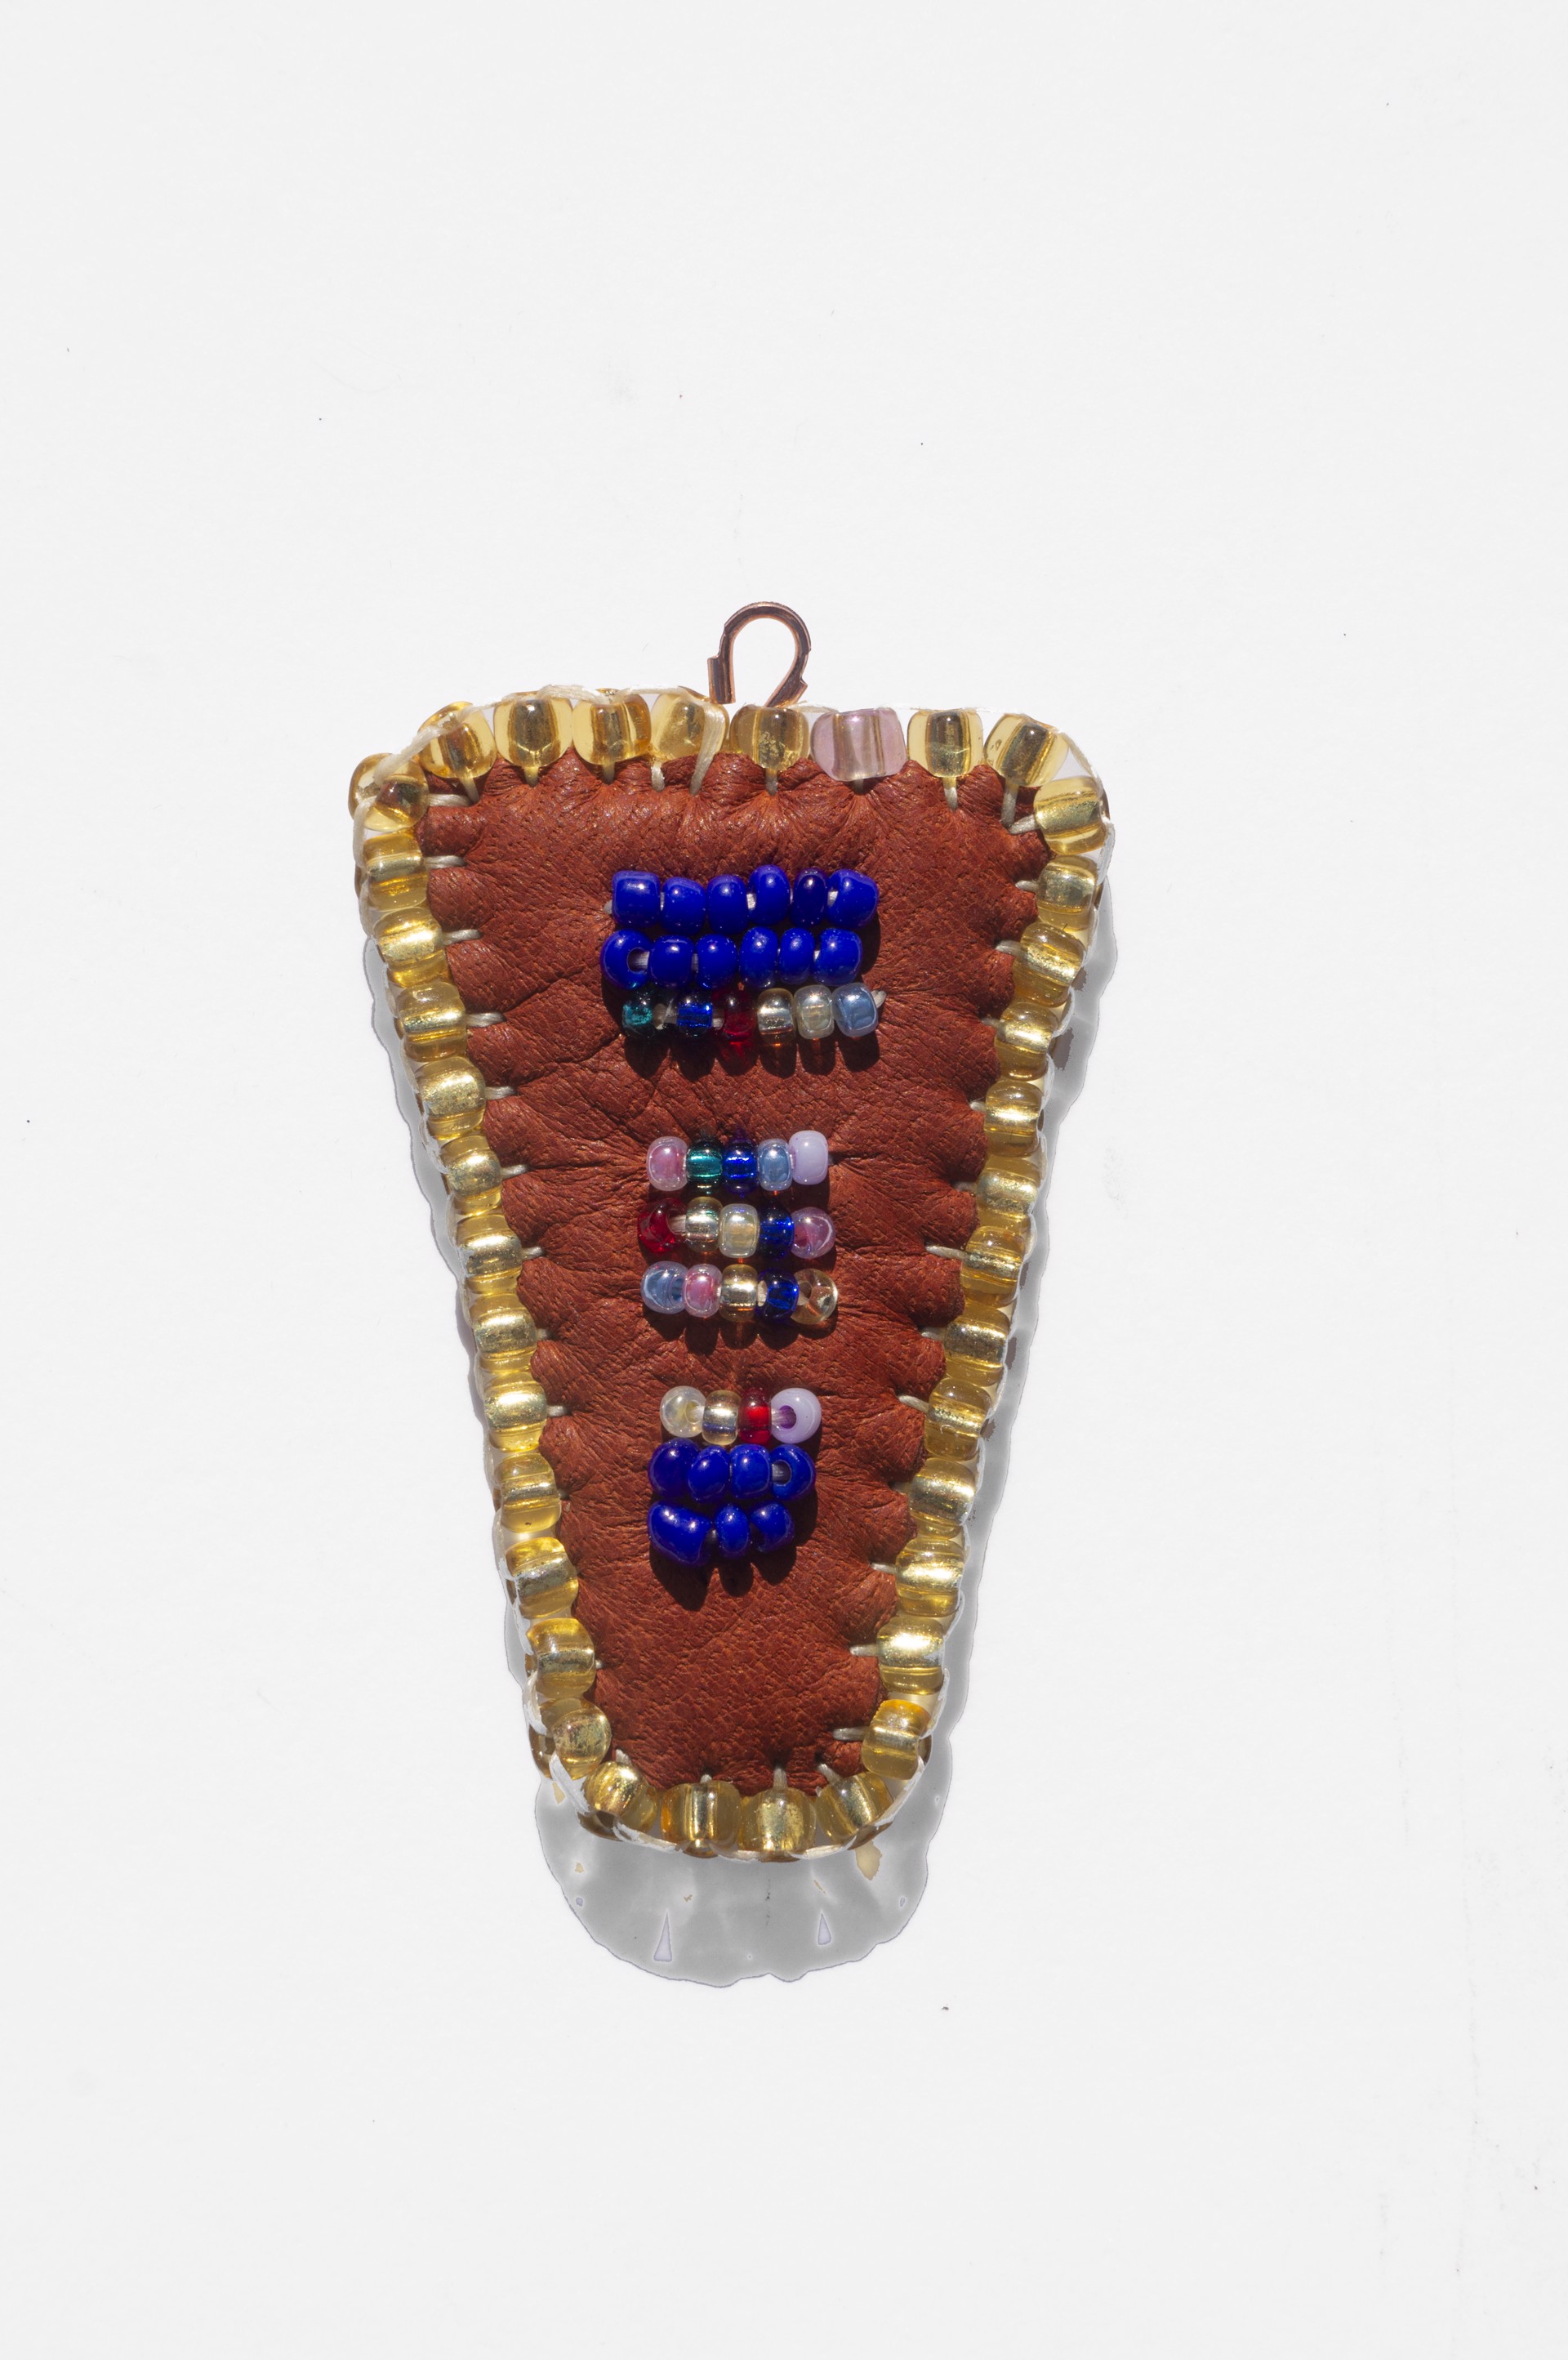 Leather Beaded Necklace by Hattie Lee Mendoza